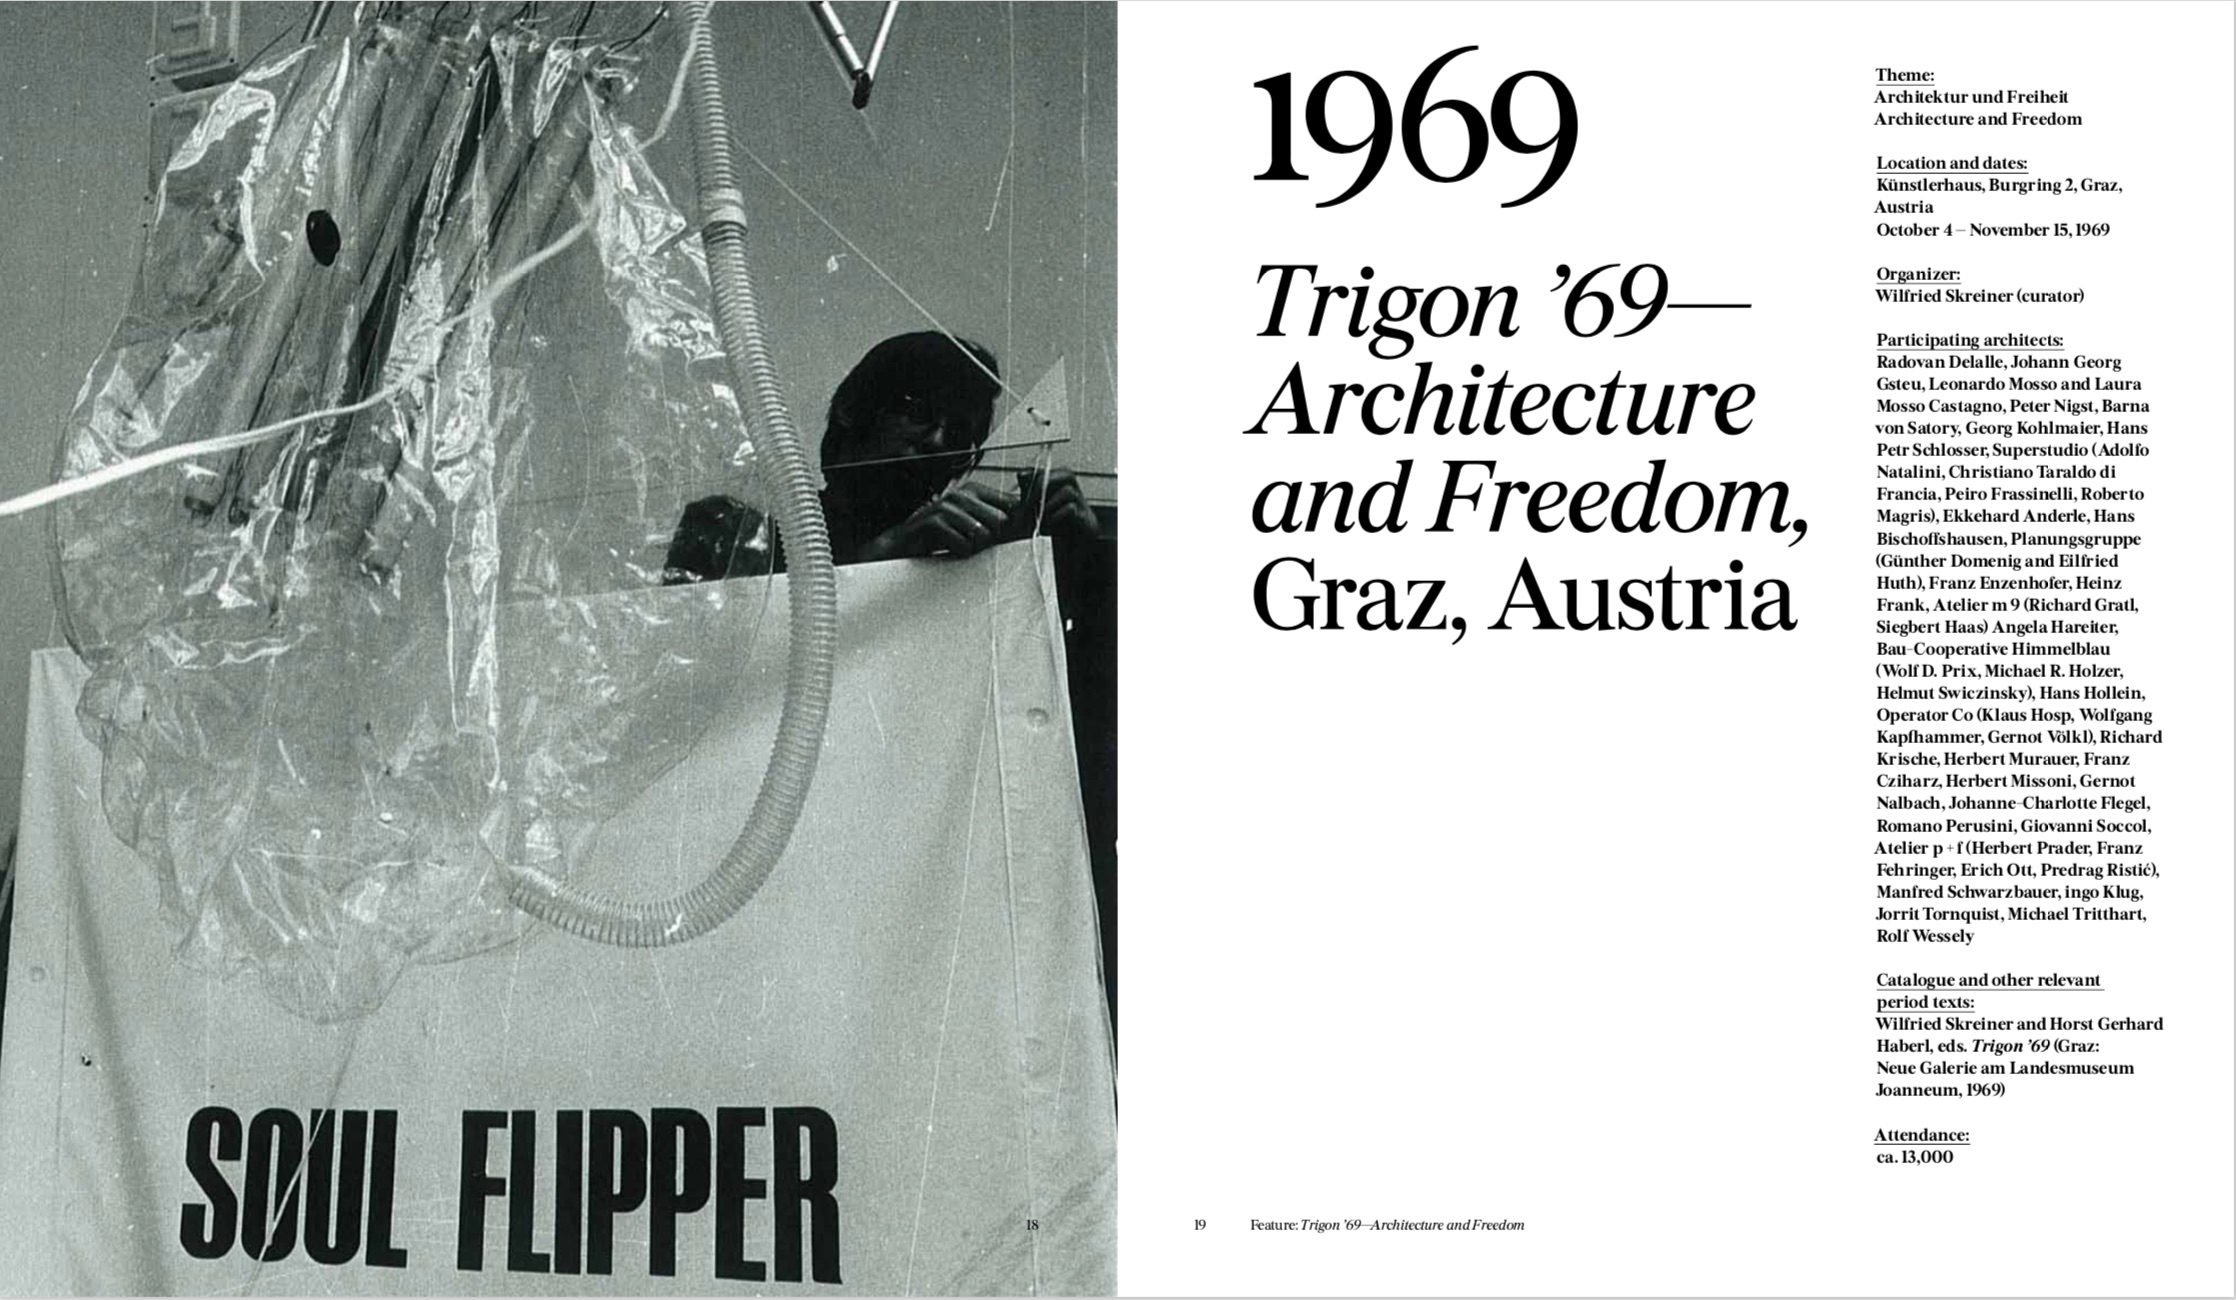 By Eeva-Liisa Pelkonen from Exhibit A: Exhibitions That Transformed Architecture, 1948-2000 copyright Phaidon 2018